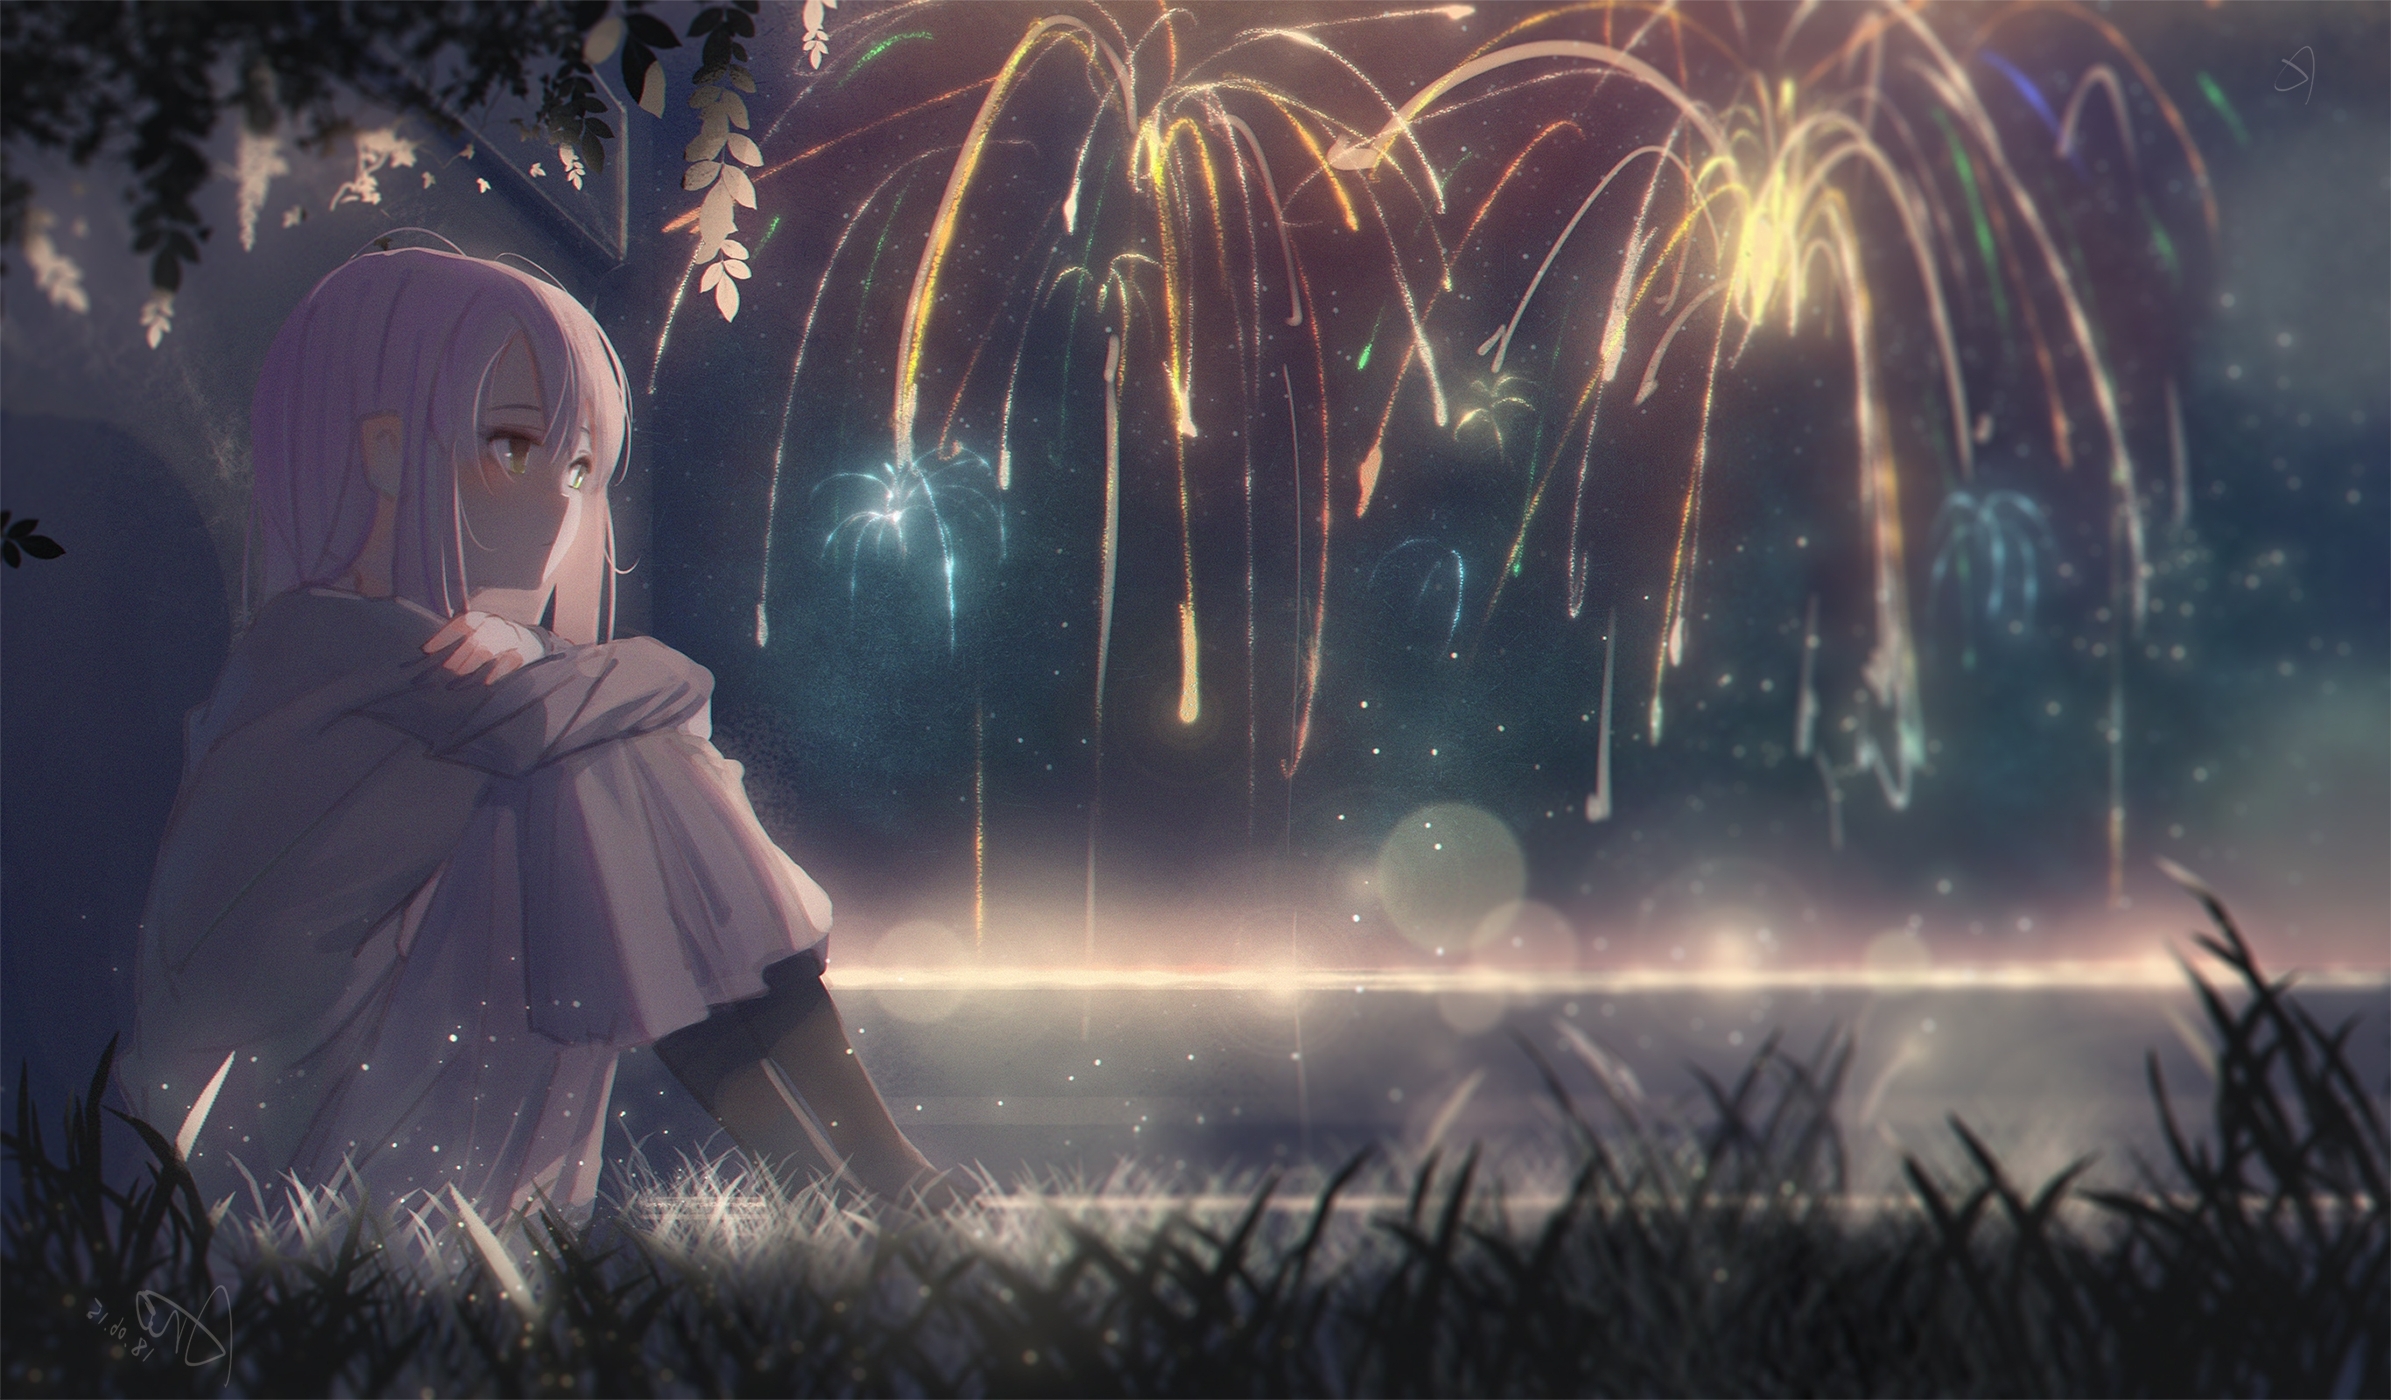 Anime Fireworks Wallpapers